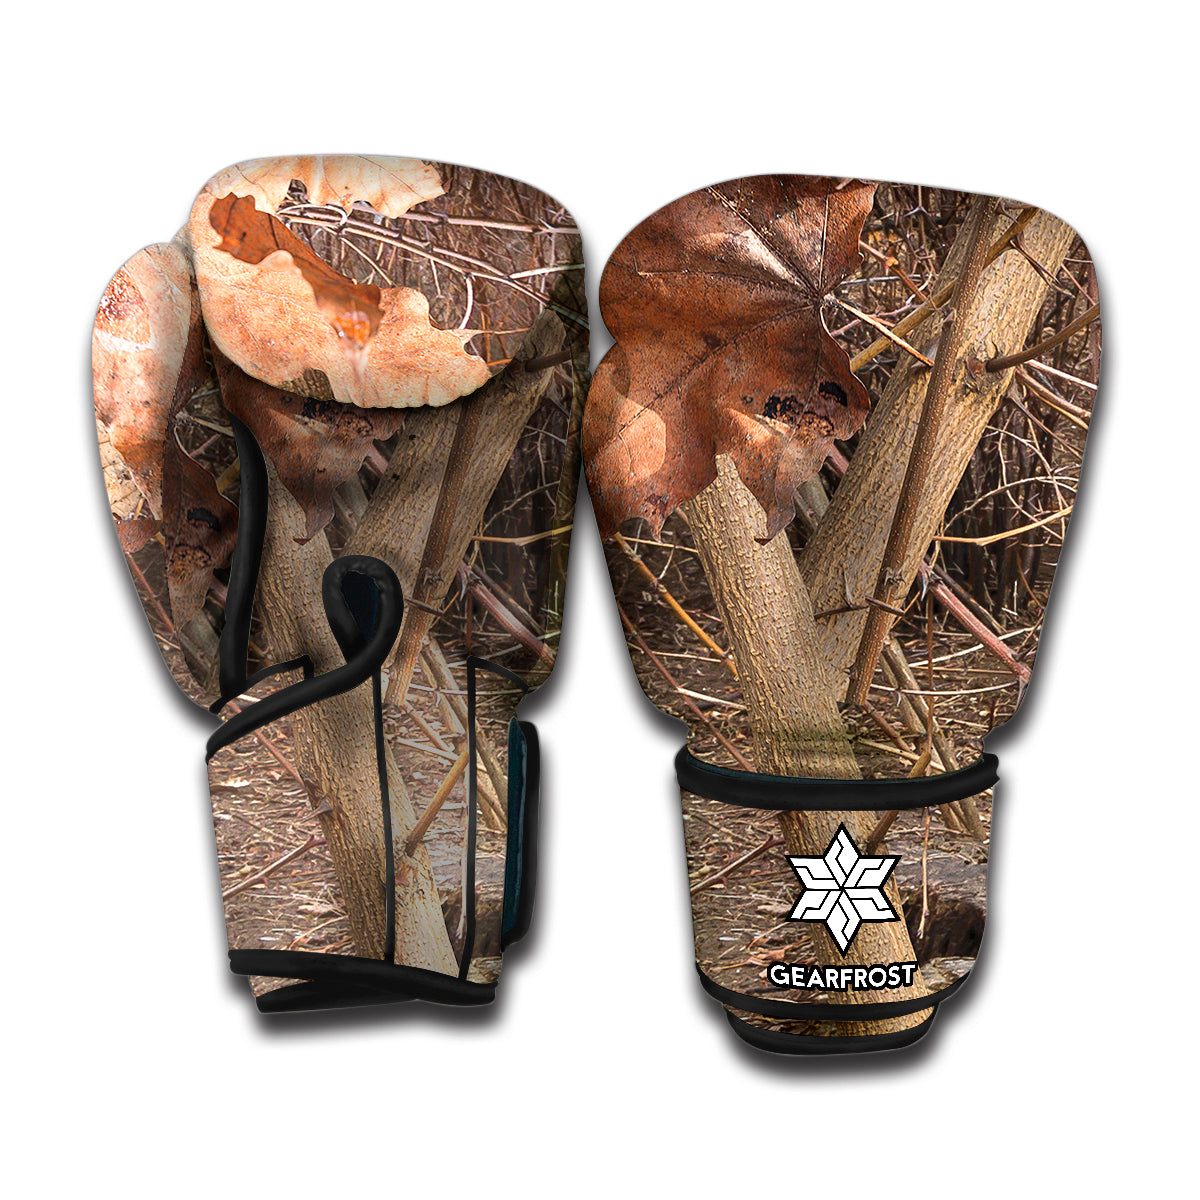 Hunting Camo Pattern Print Boxing Gloves